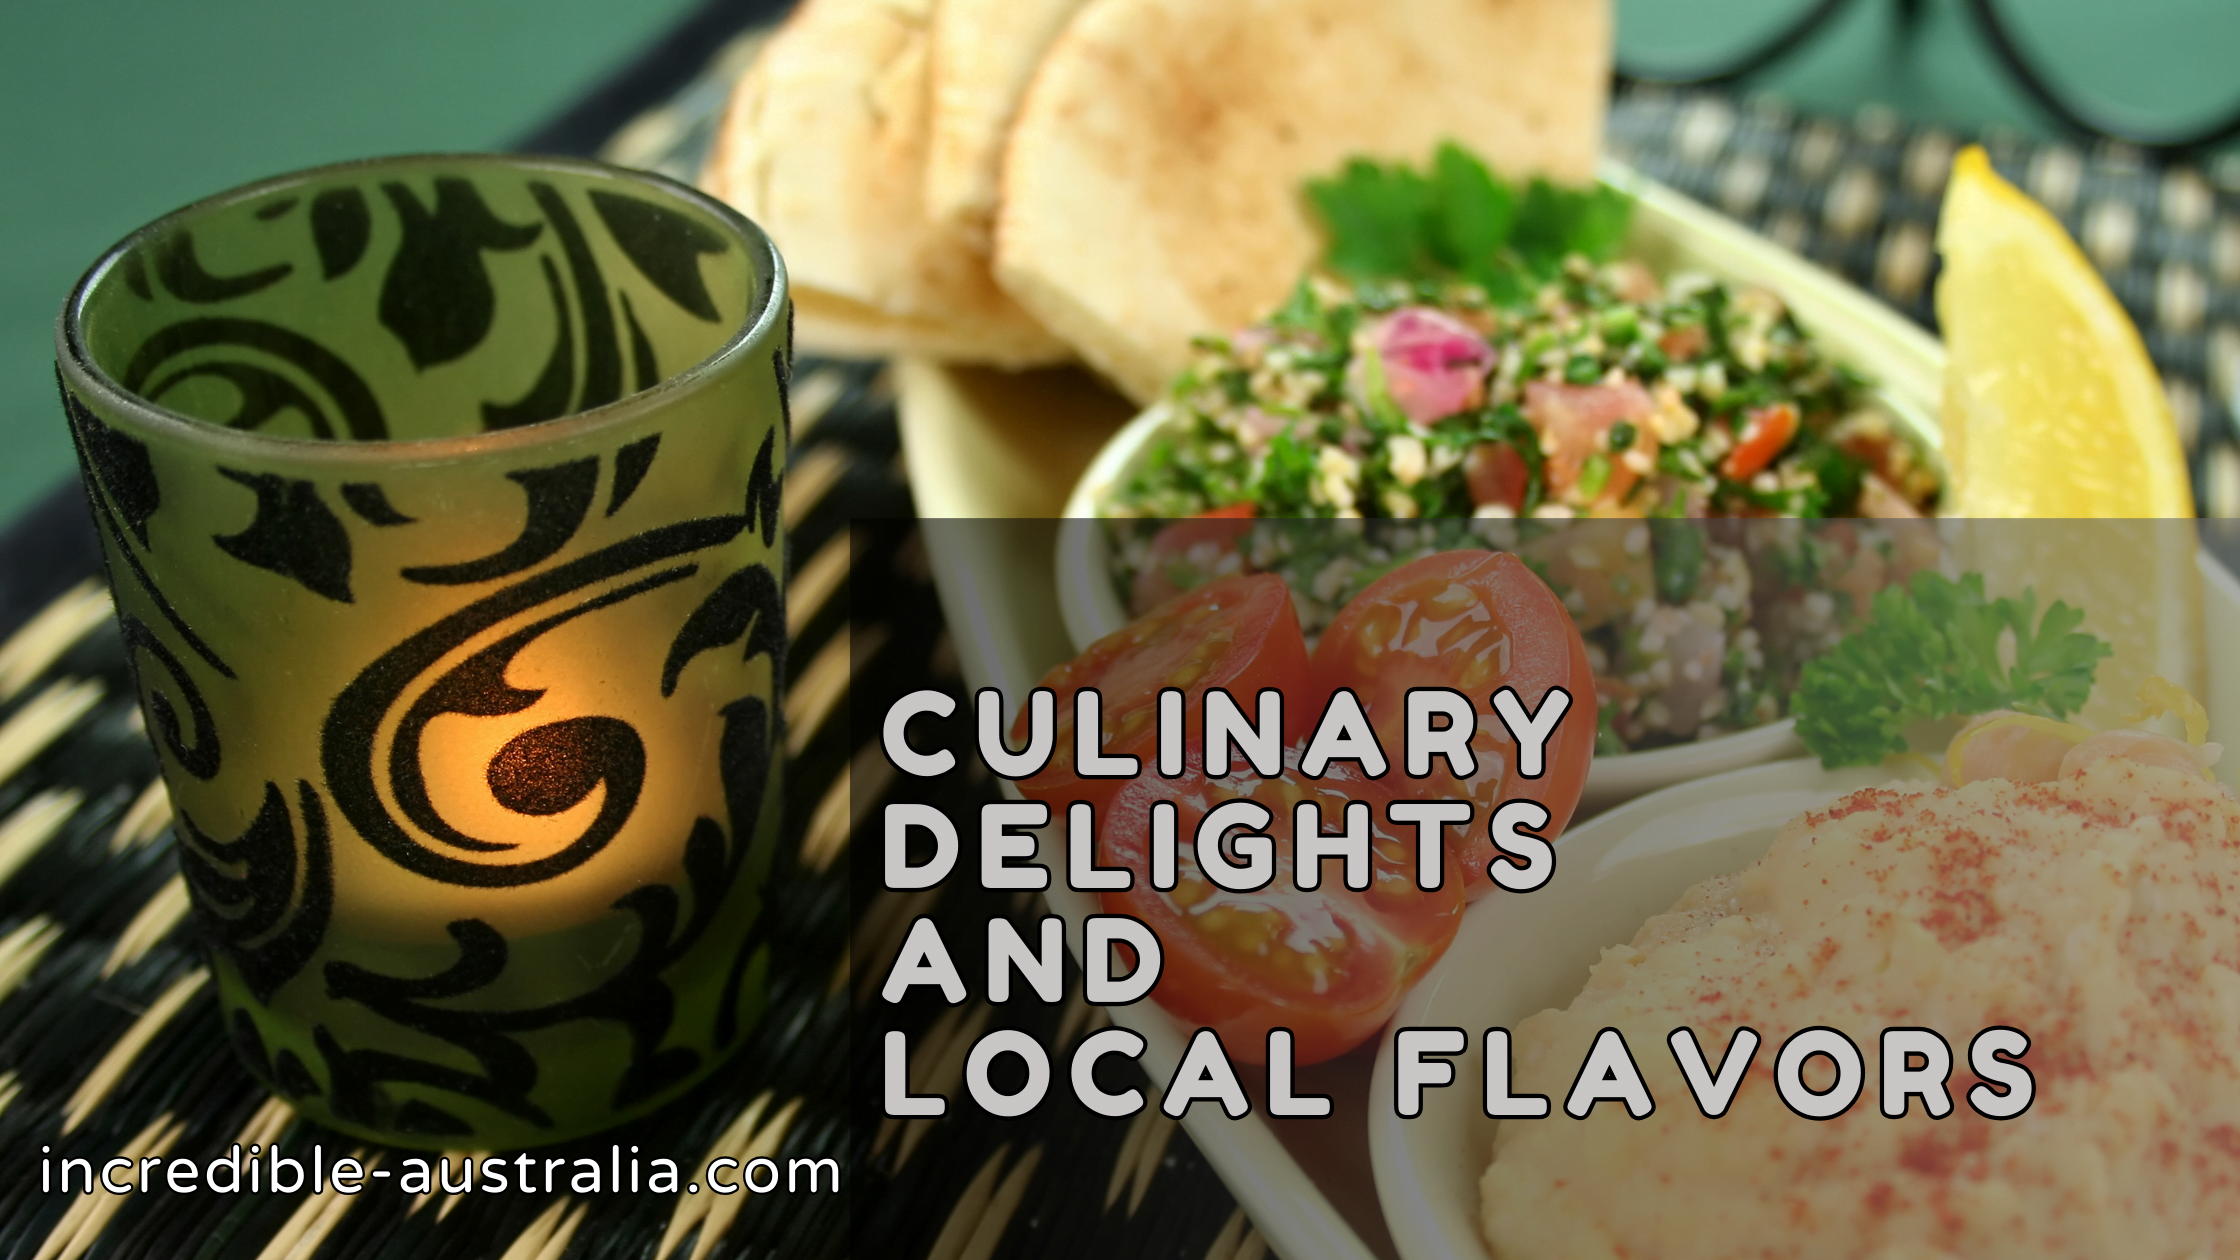 Culinary Delights and Local Flavors